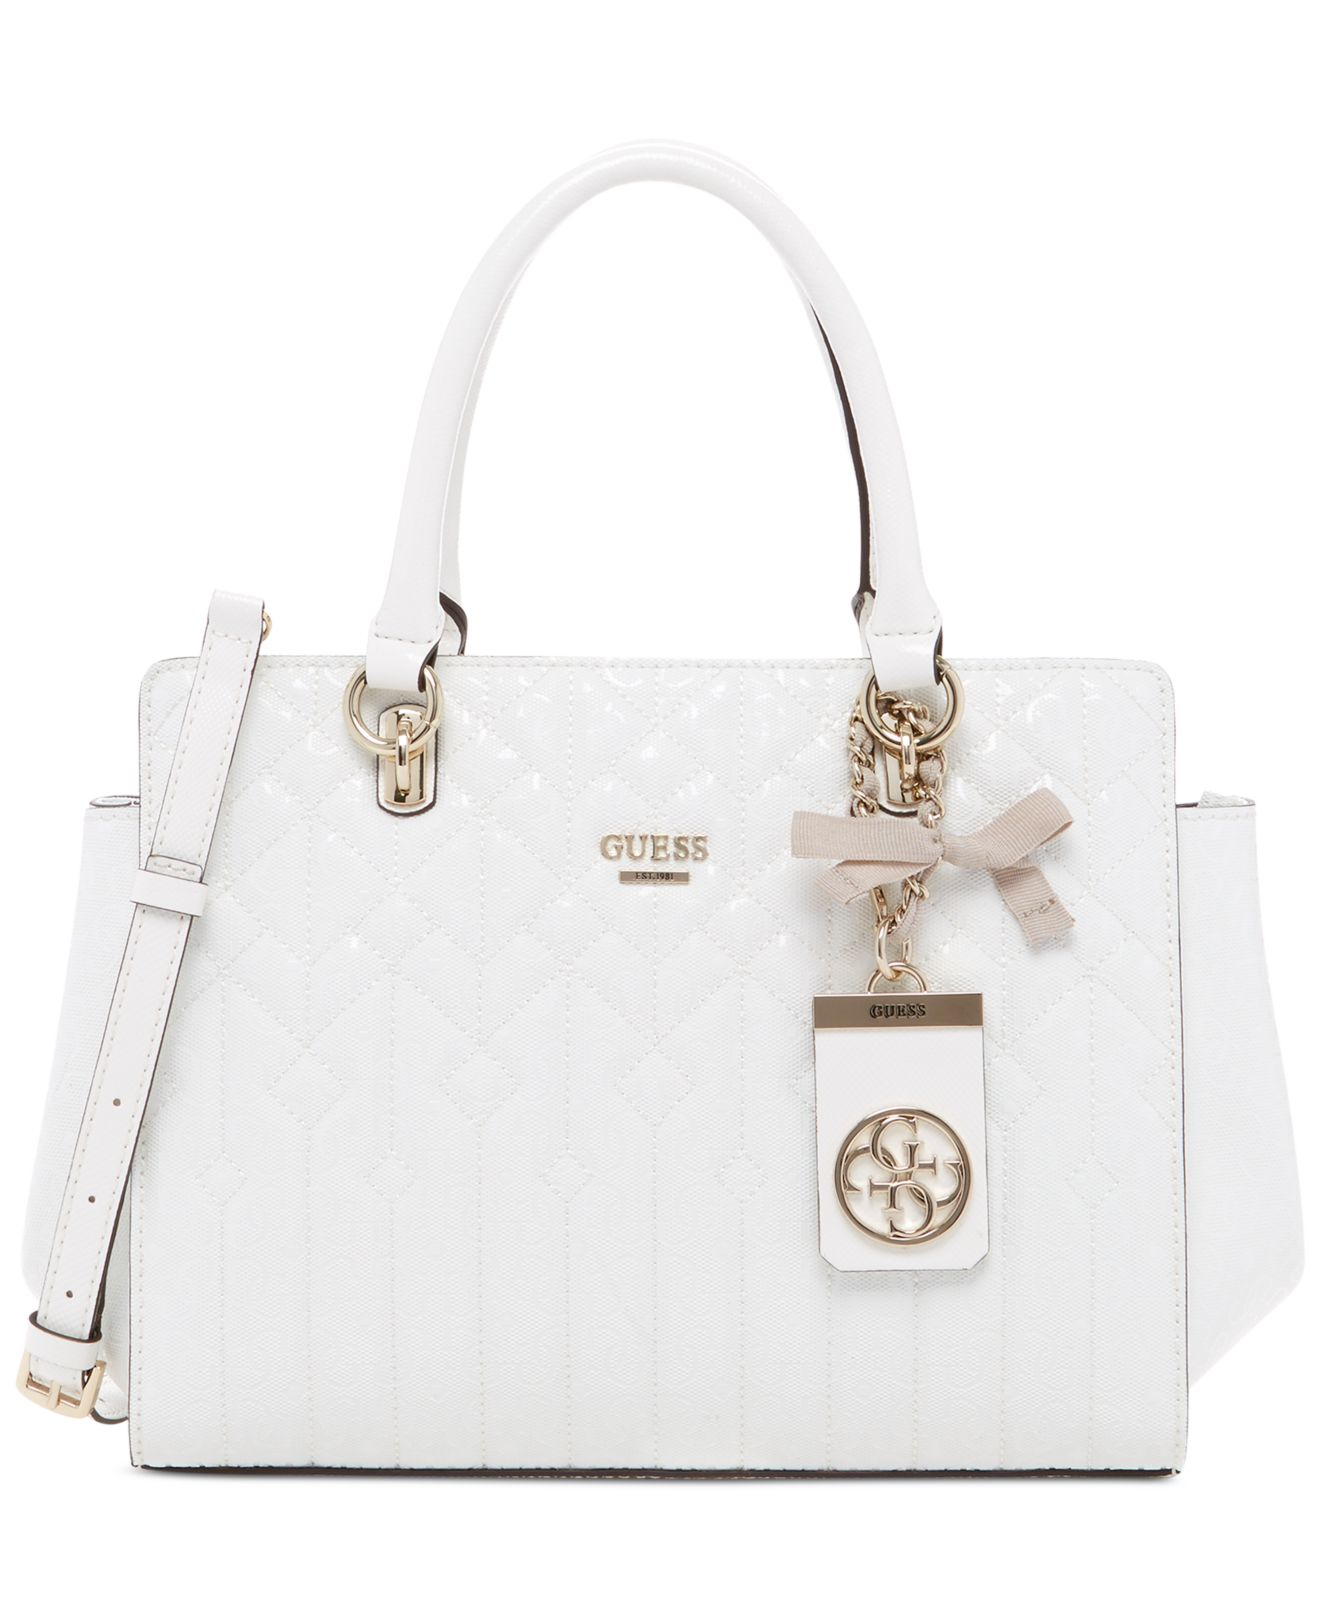 Lyst - Guess Malena Satchel in White